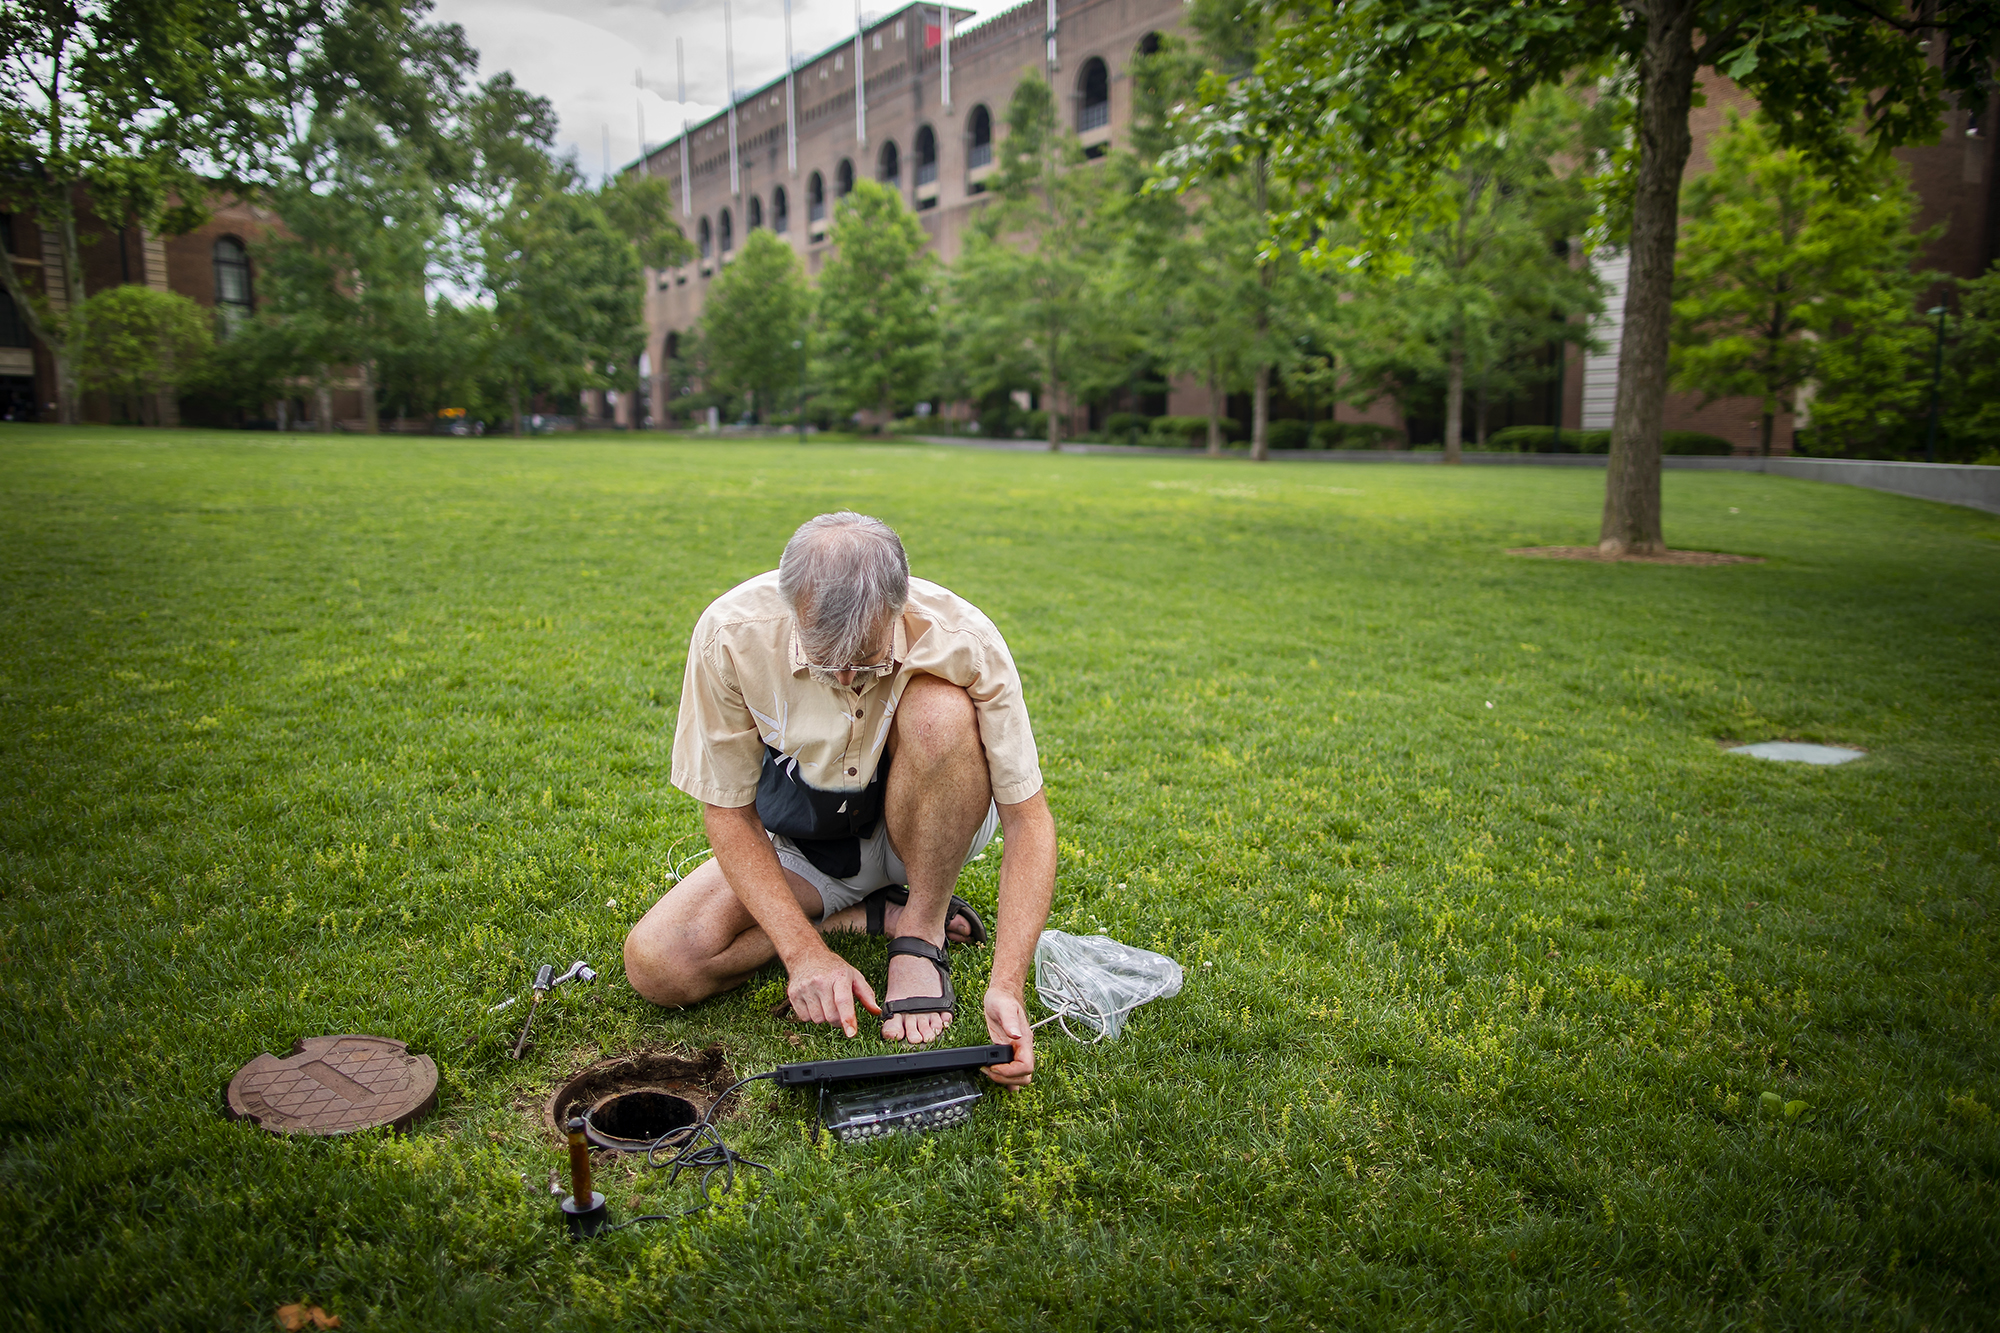 A scientist kneeling on a lawn checks a well using electronic monitoring equipment